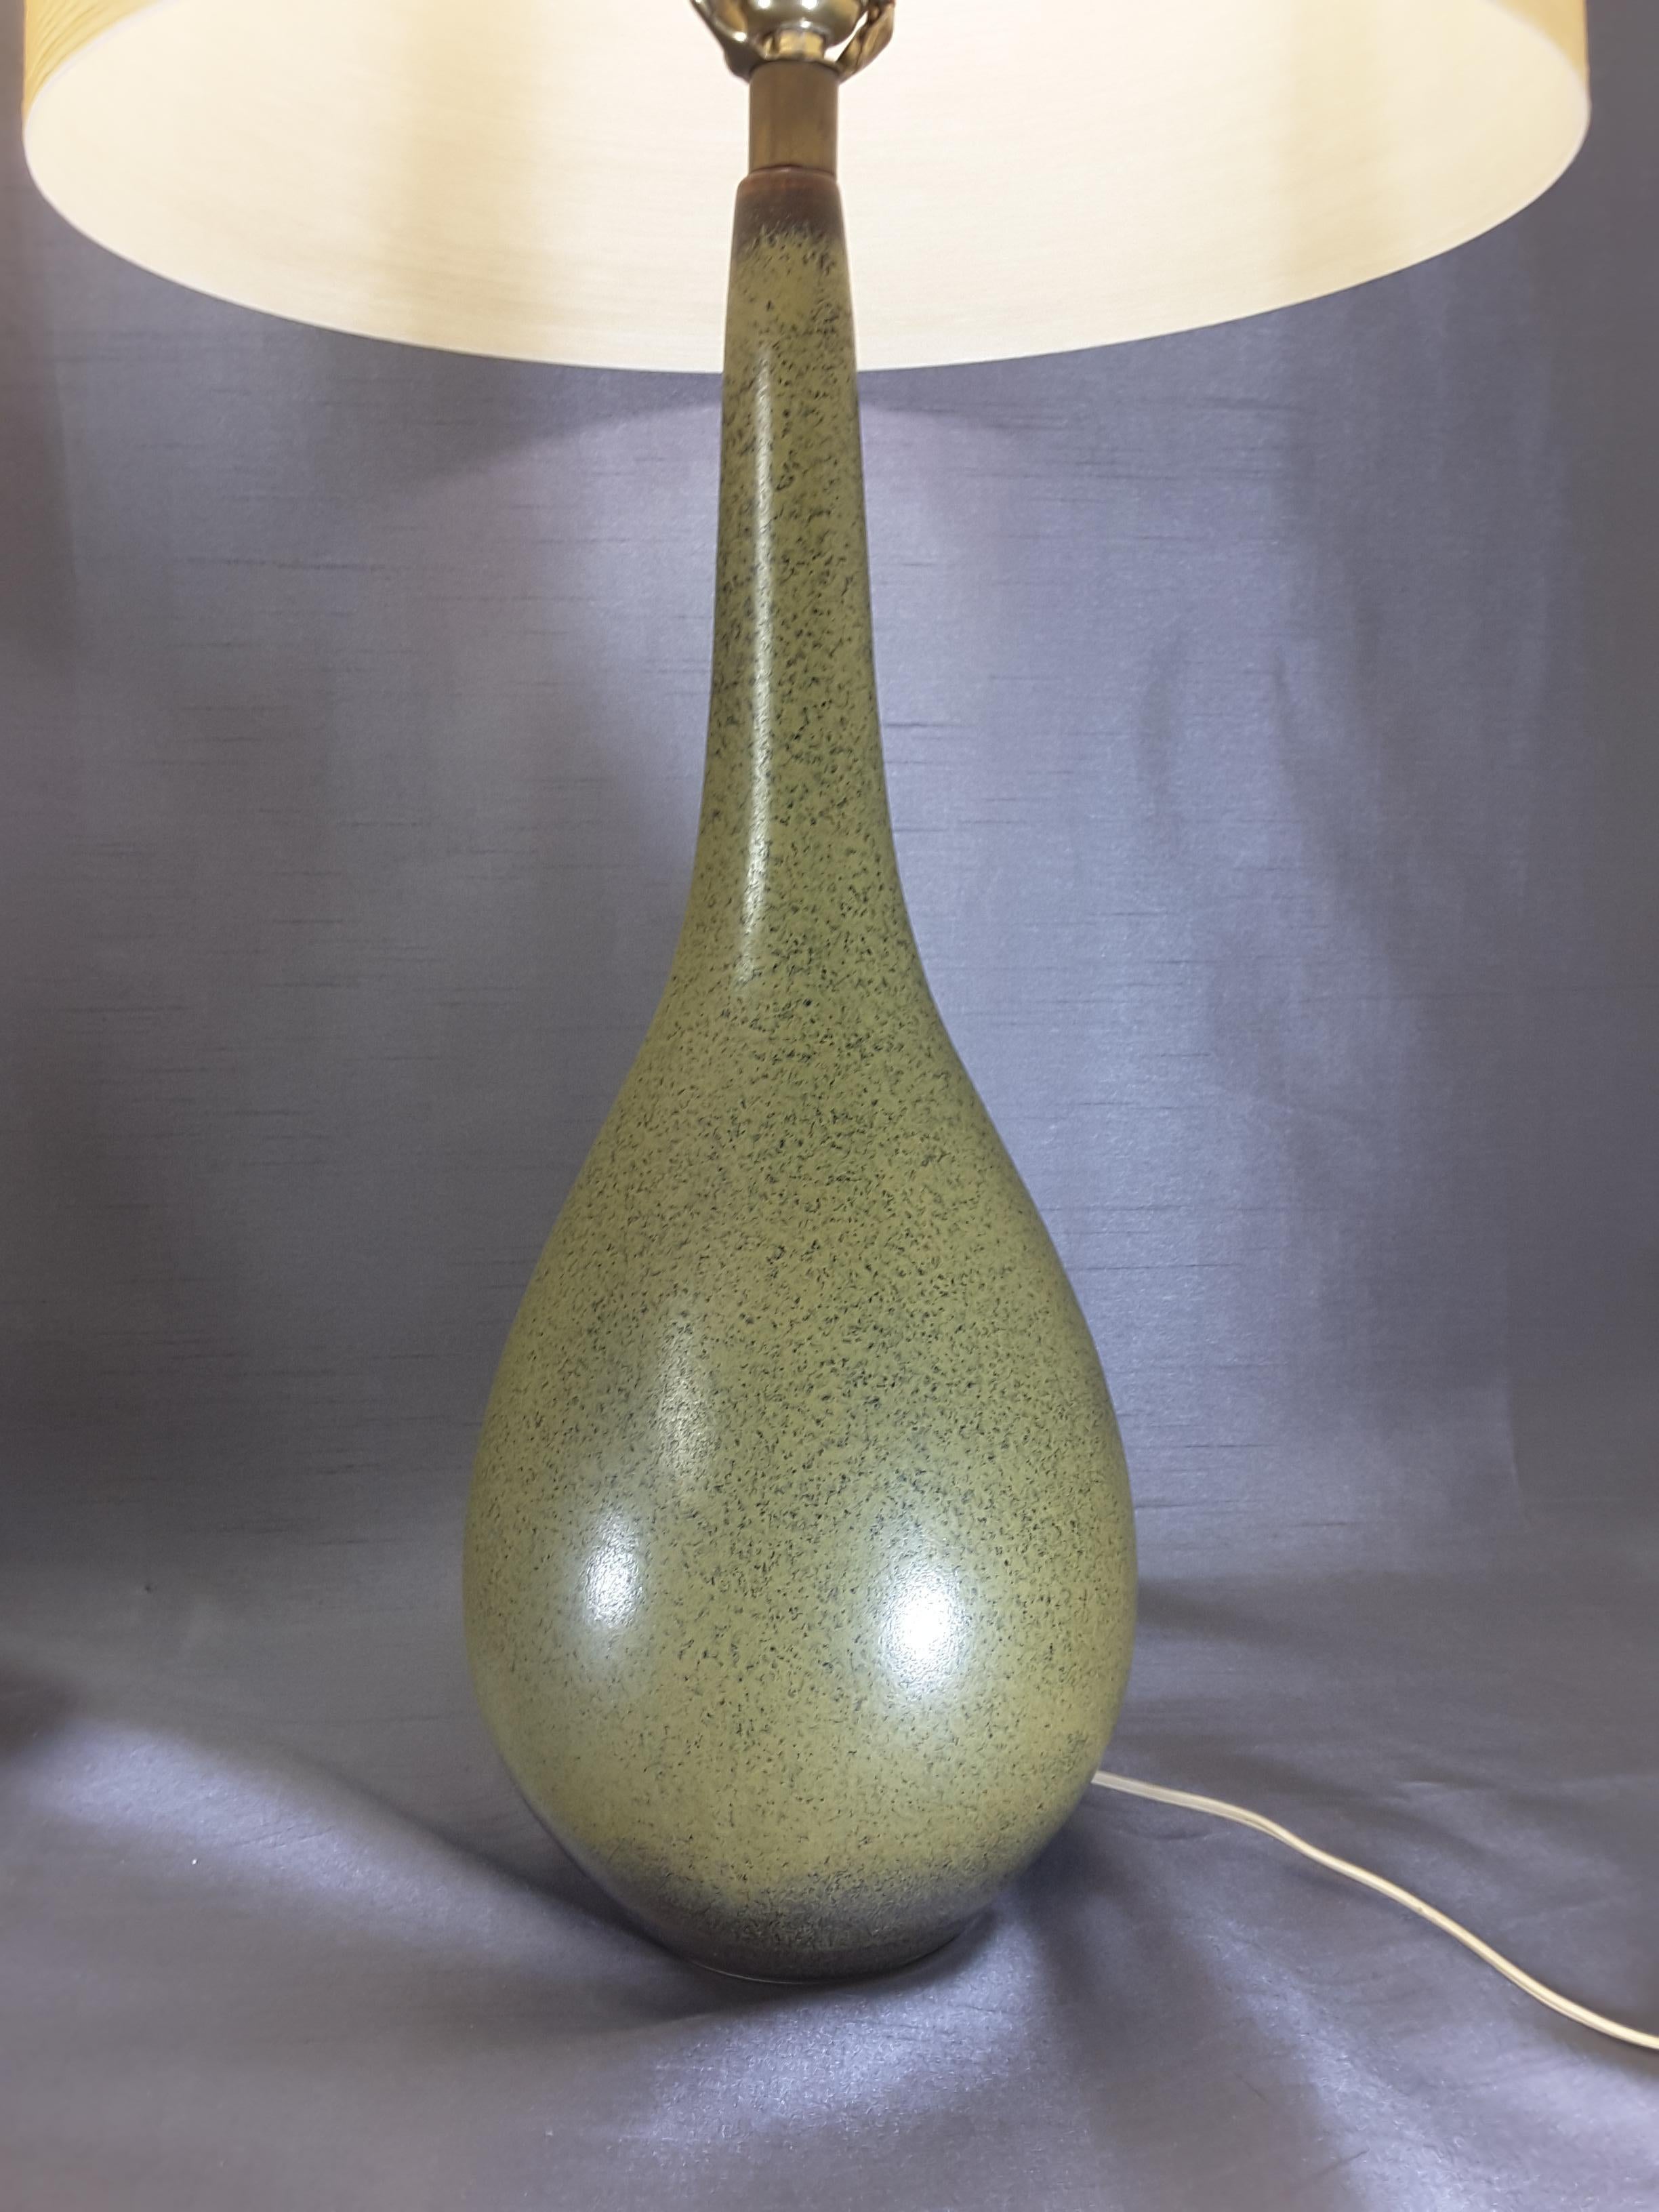 Large Scale Pair of Lotte & Gunnar Bostlund Forest Green Table Lamps, Circa 1960. 
Stunning in color, size and design. The stoneware bases are in a large bulbous shape, Deep forest green with mottled black specks. The lamps retain their original